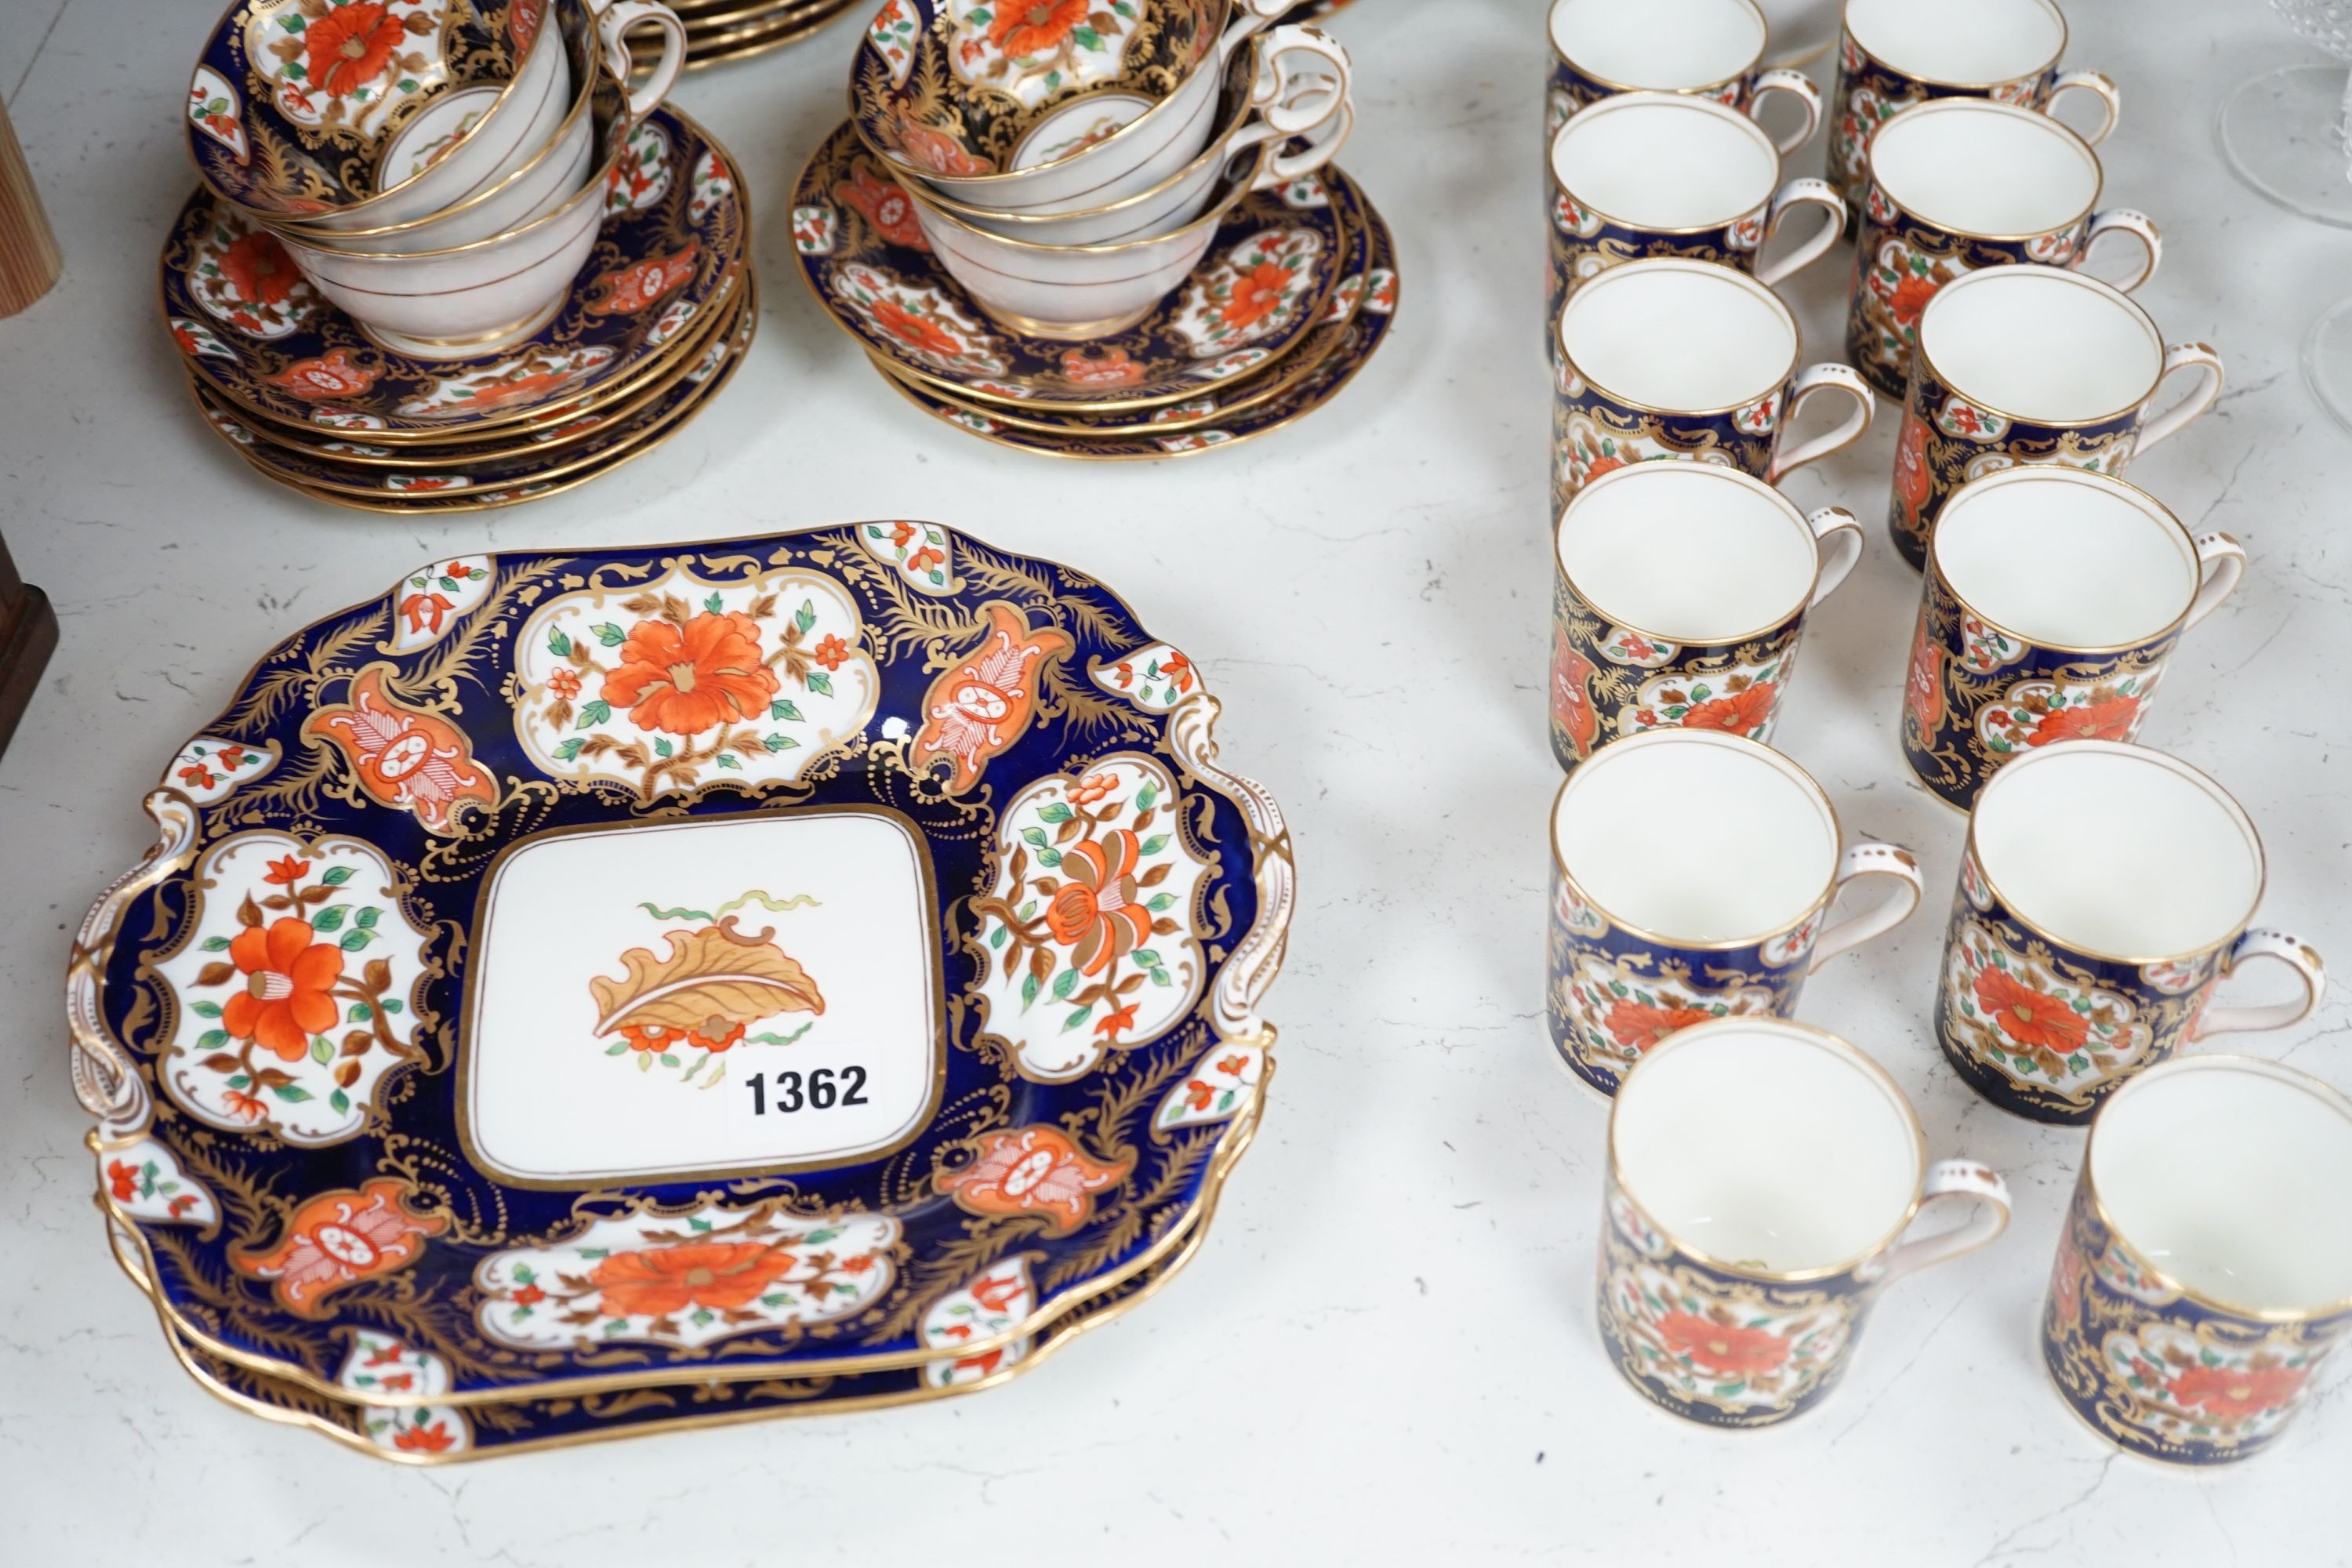 A mid 19th century English bone china fifty-two piece part tea and coffee service, decorated in an Imari pattern